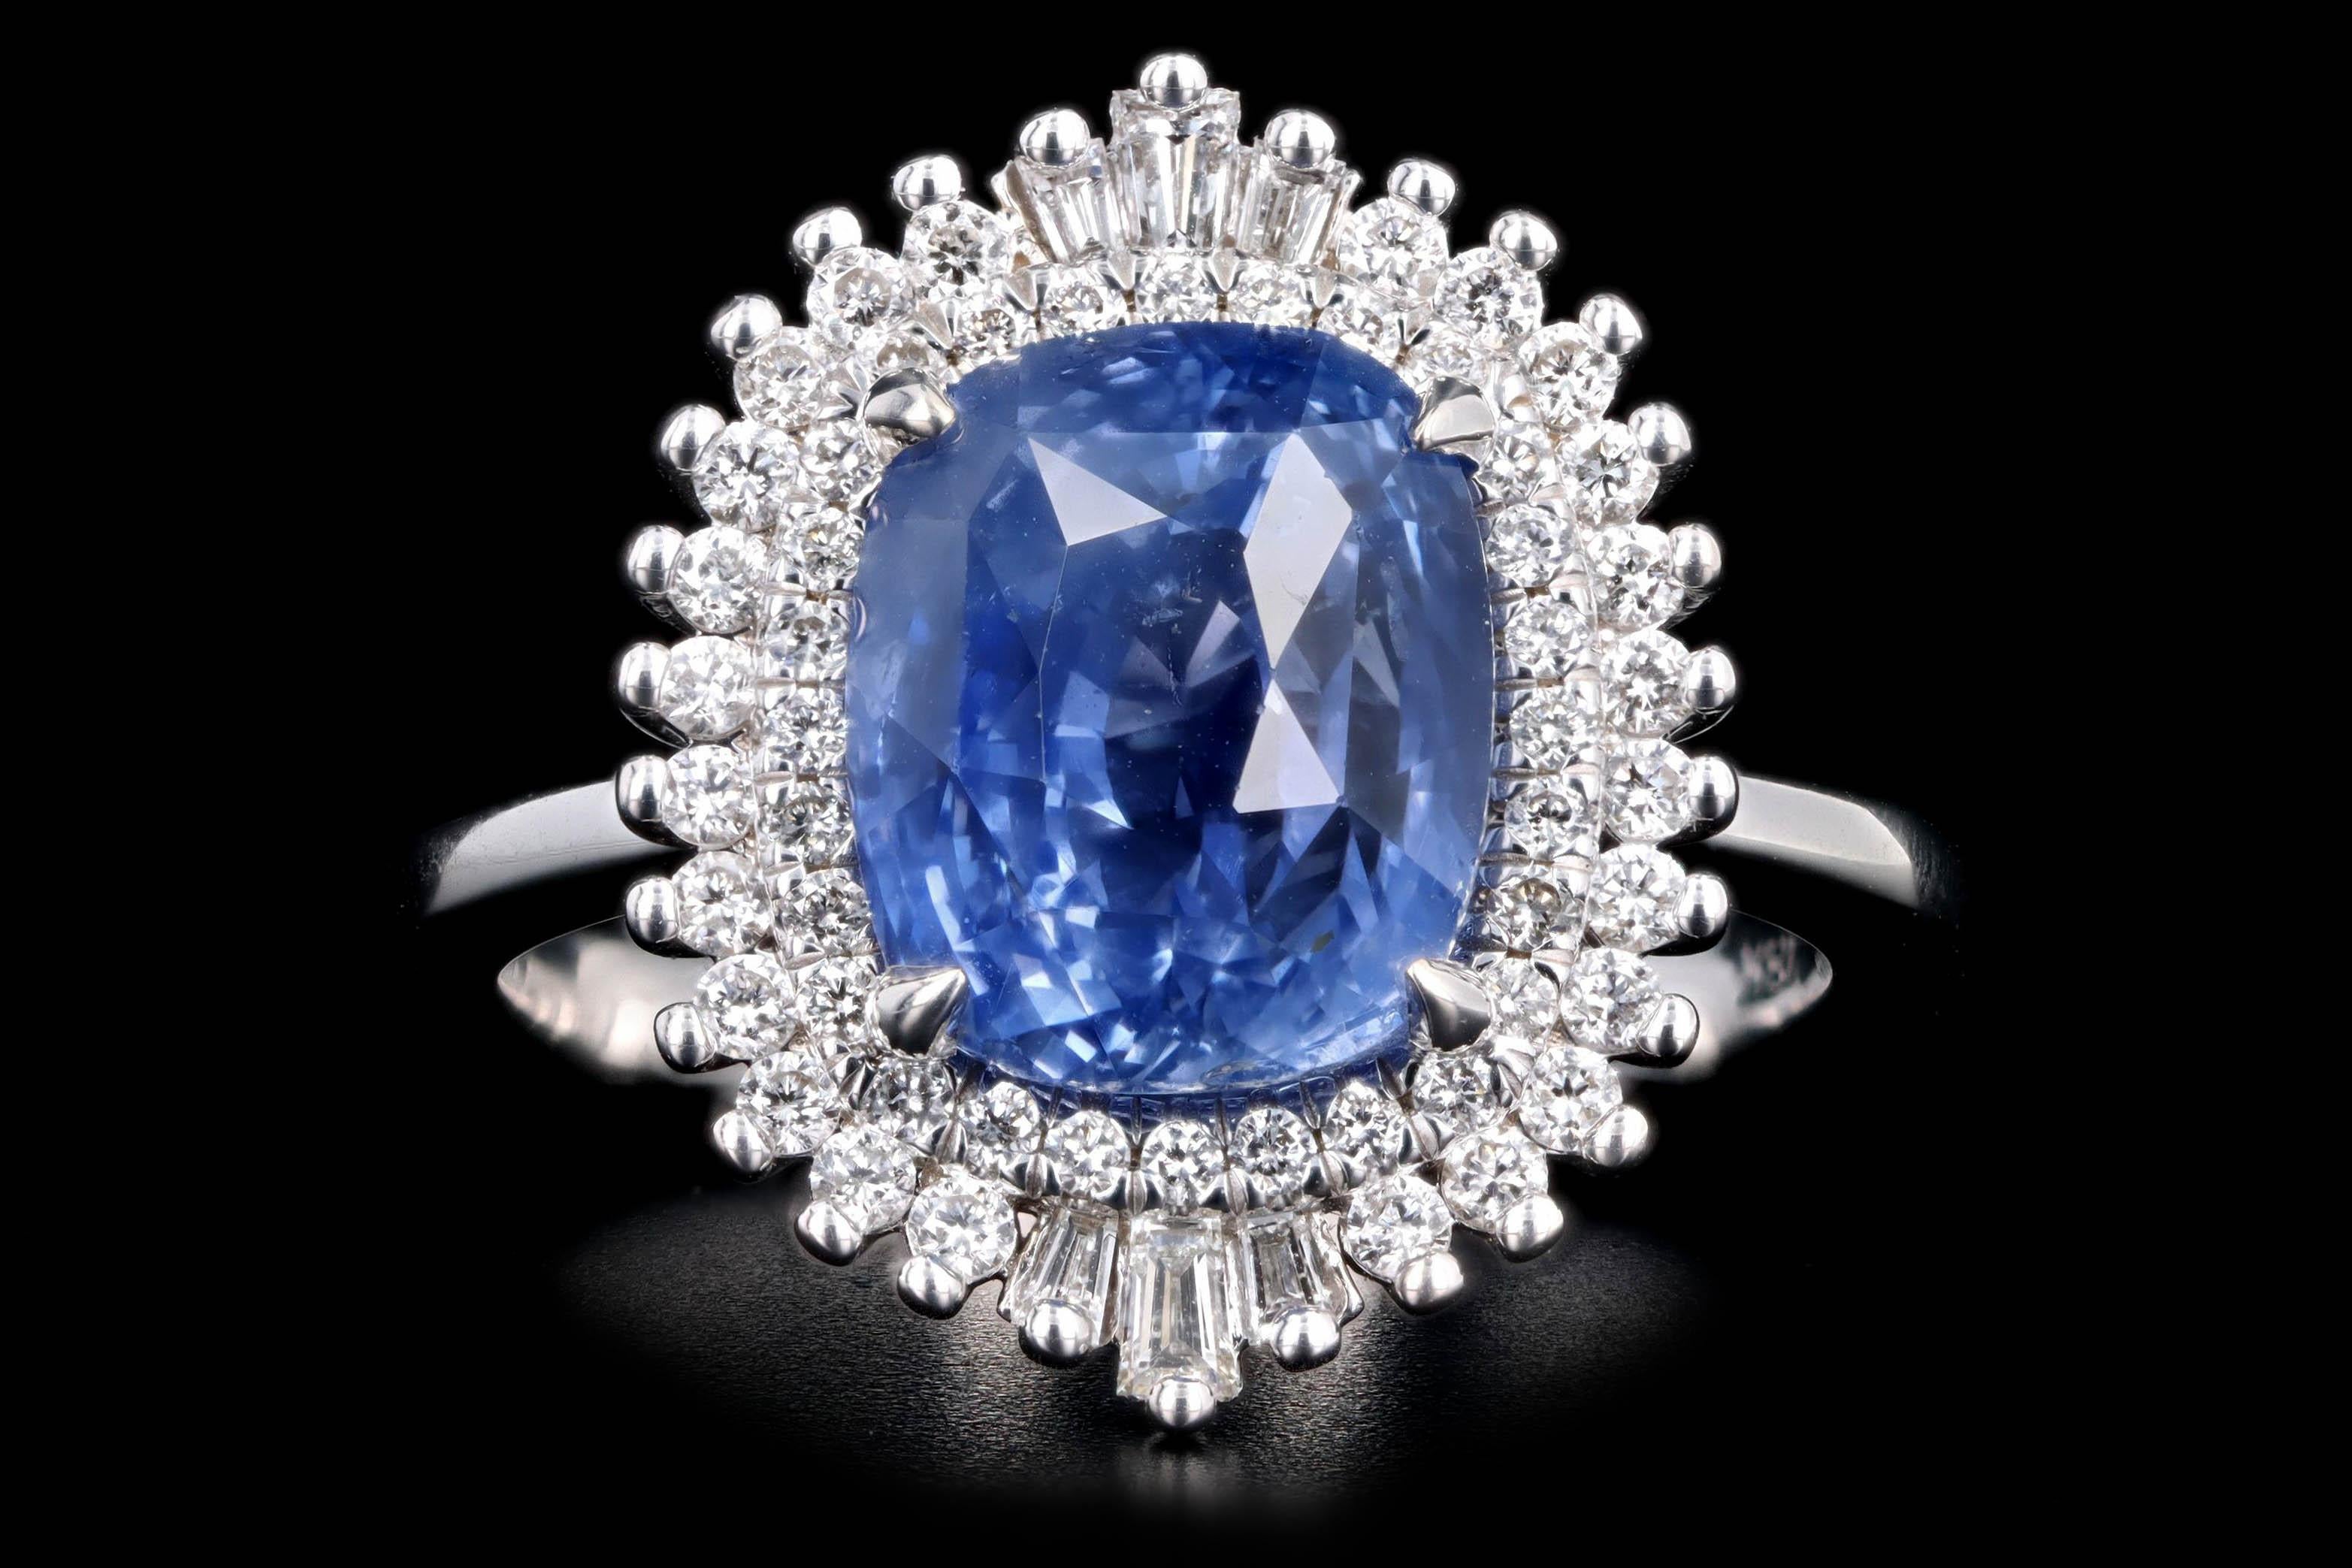 Era: New 

Composition: Platinum 

Primary Stone: Cushion Cut Natural Sapphire

Carat Weight: 5.12 Carats

Origin: Sri Lanka

Treatment: No Indications of Heating

GIA Report Number: 2213403130

Accent Stone: Round Brilliant Cut & Tapered Baguette